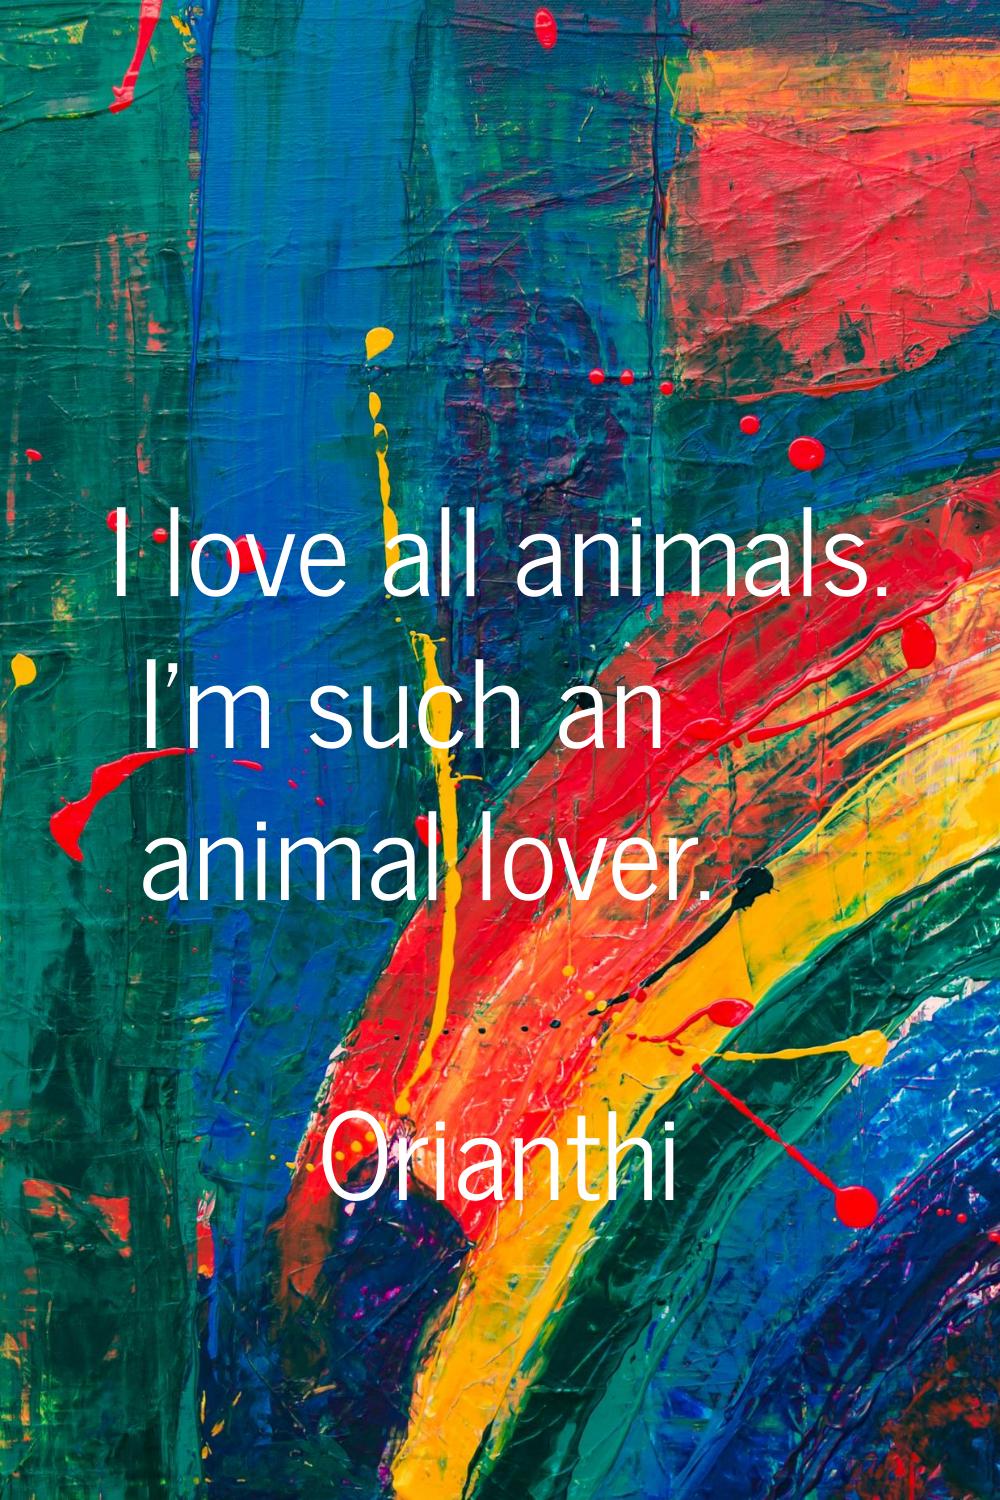 I love all animals. I'm such an animal lover.